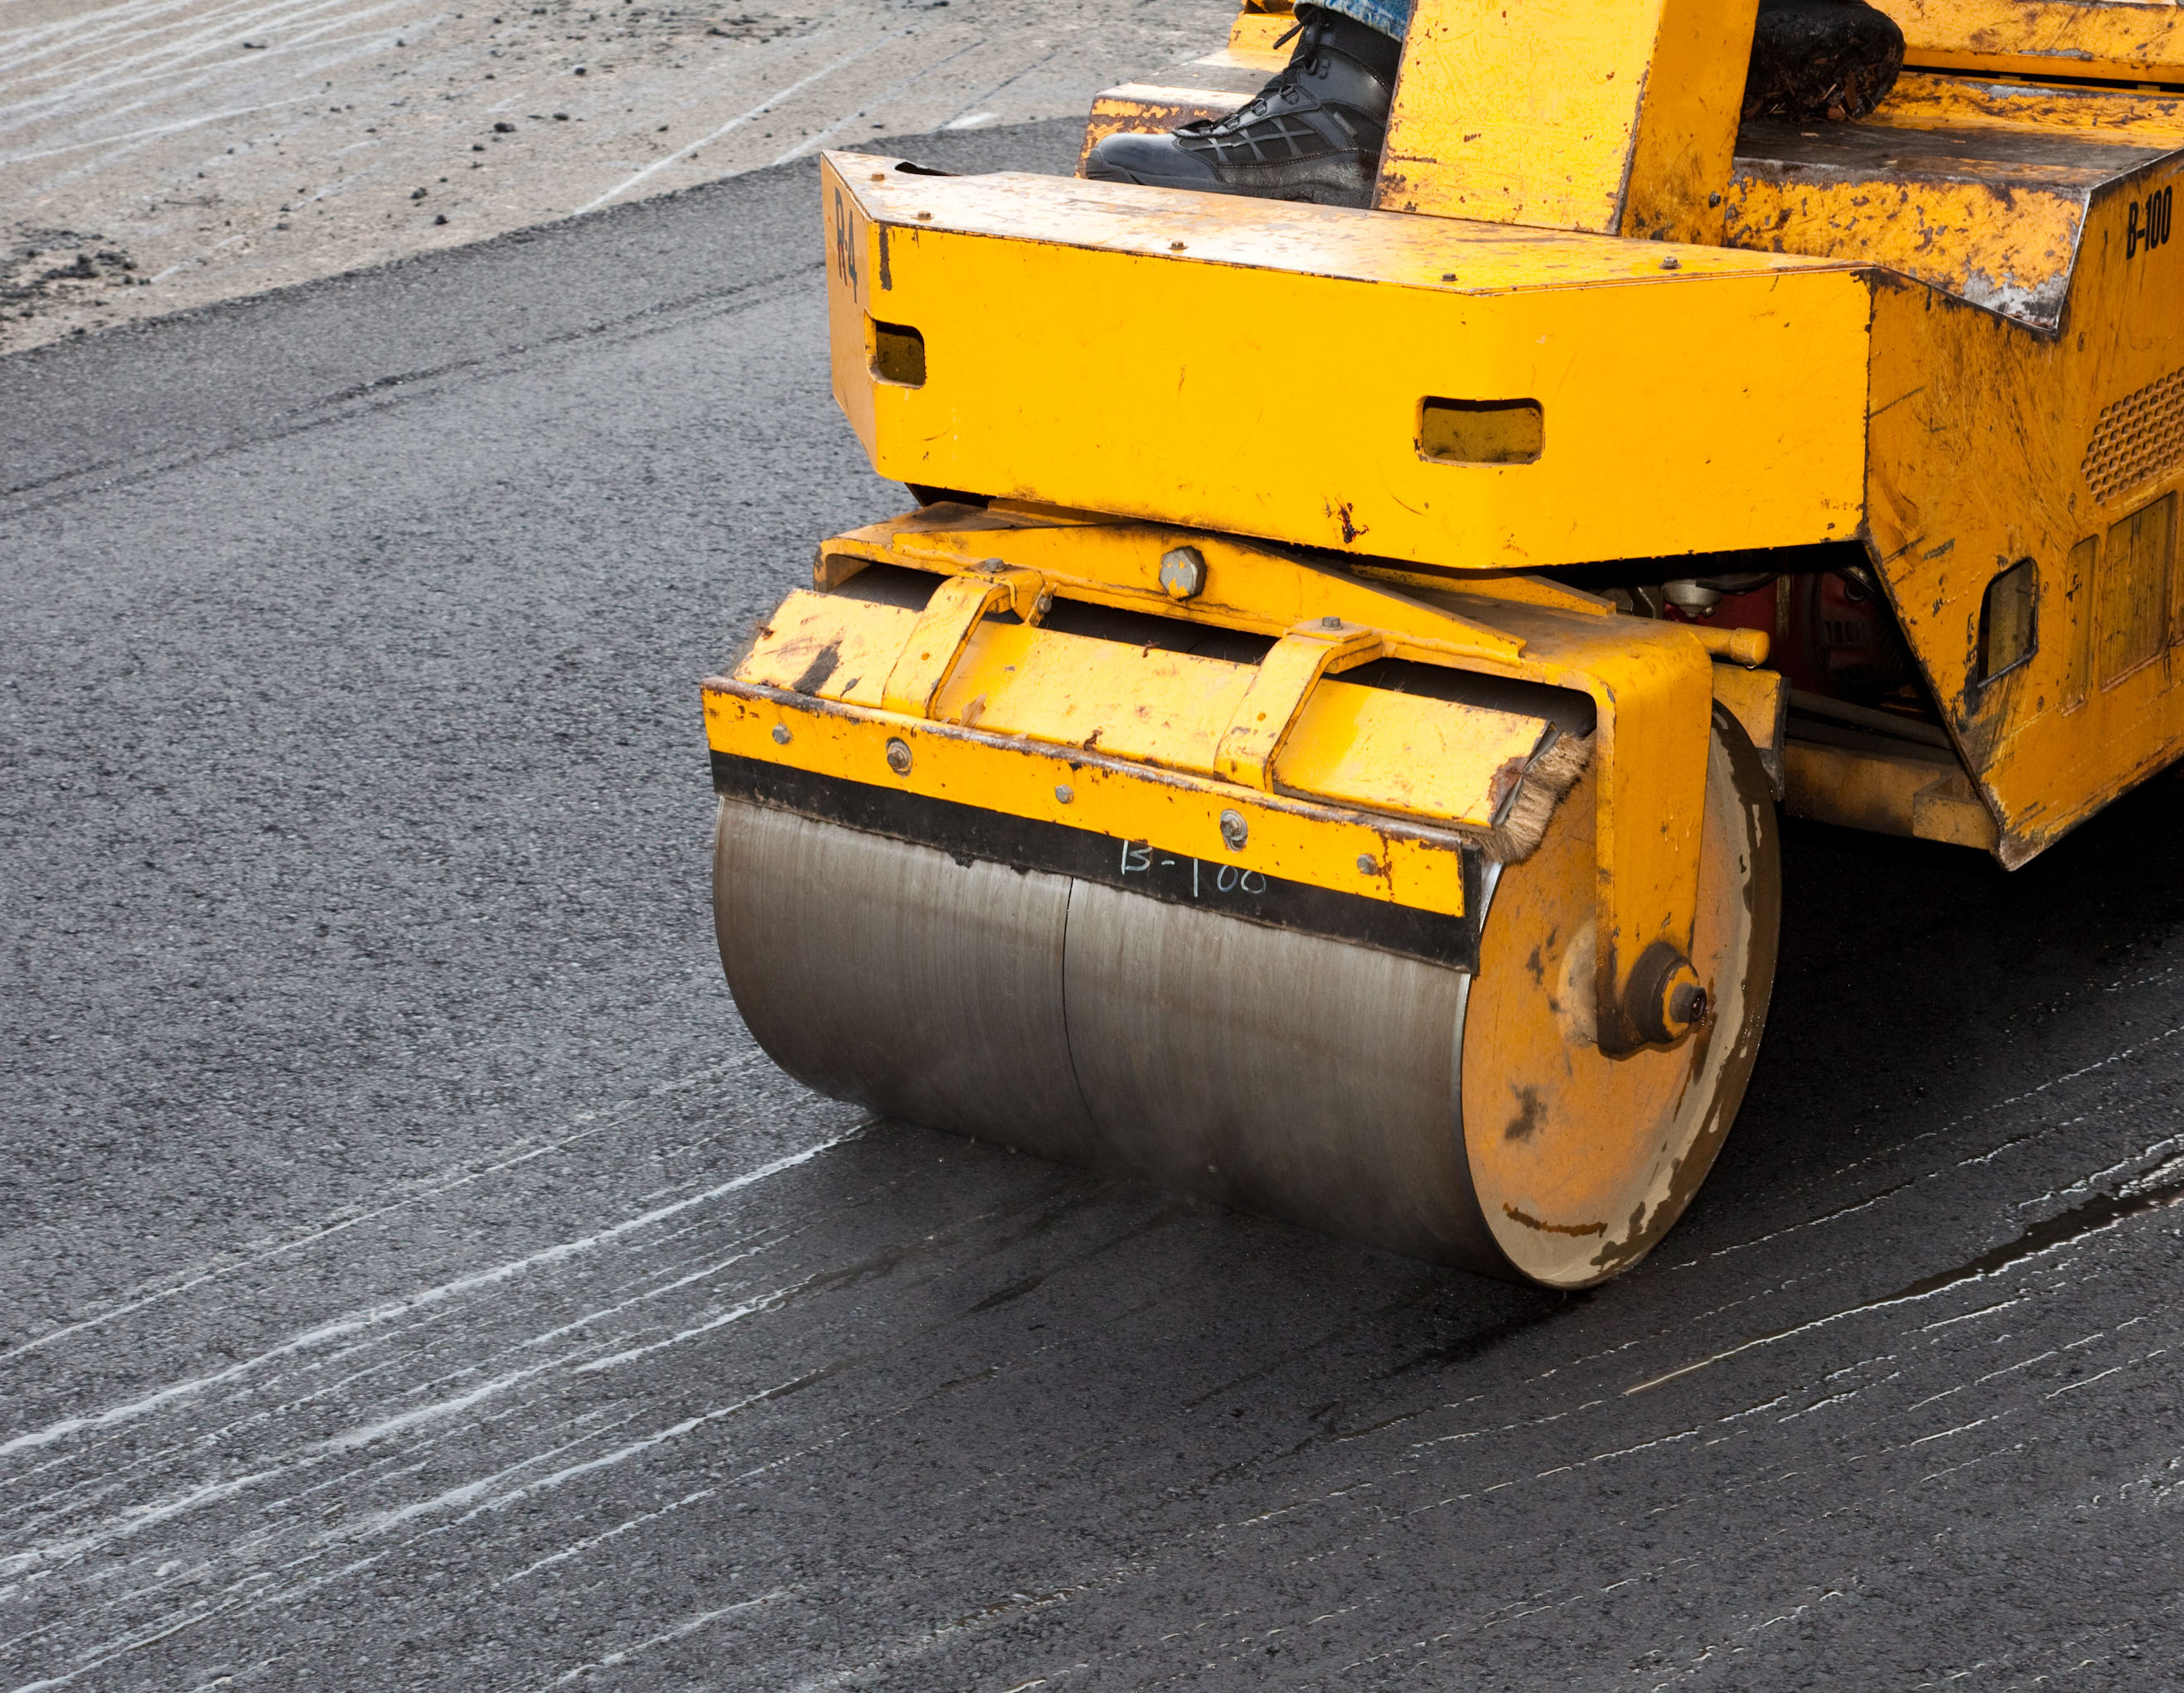 Pigeon Forge Parkway Paving Notice – Starts September 16th